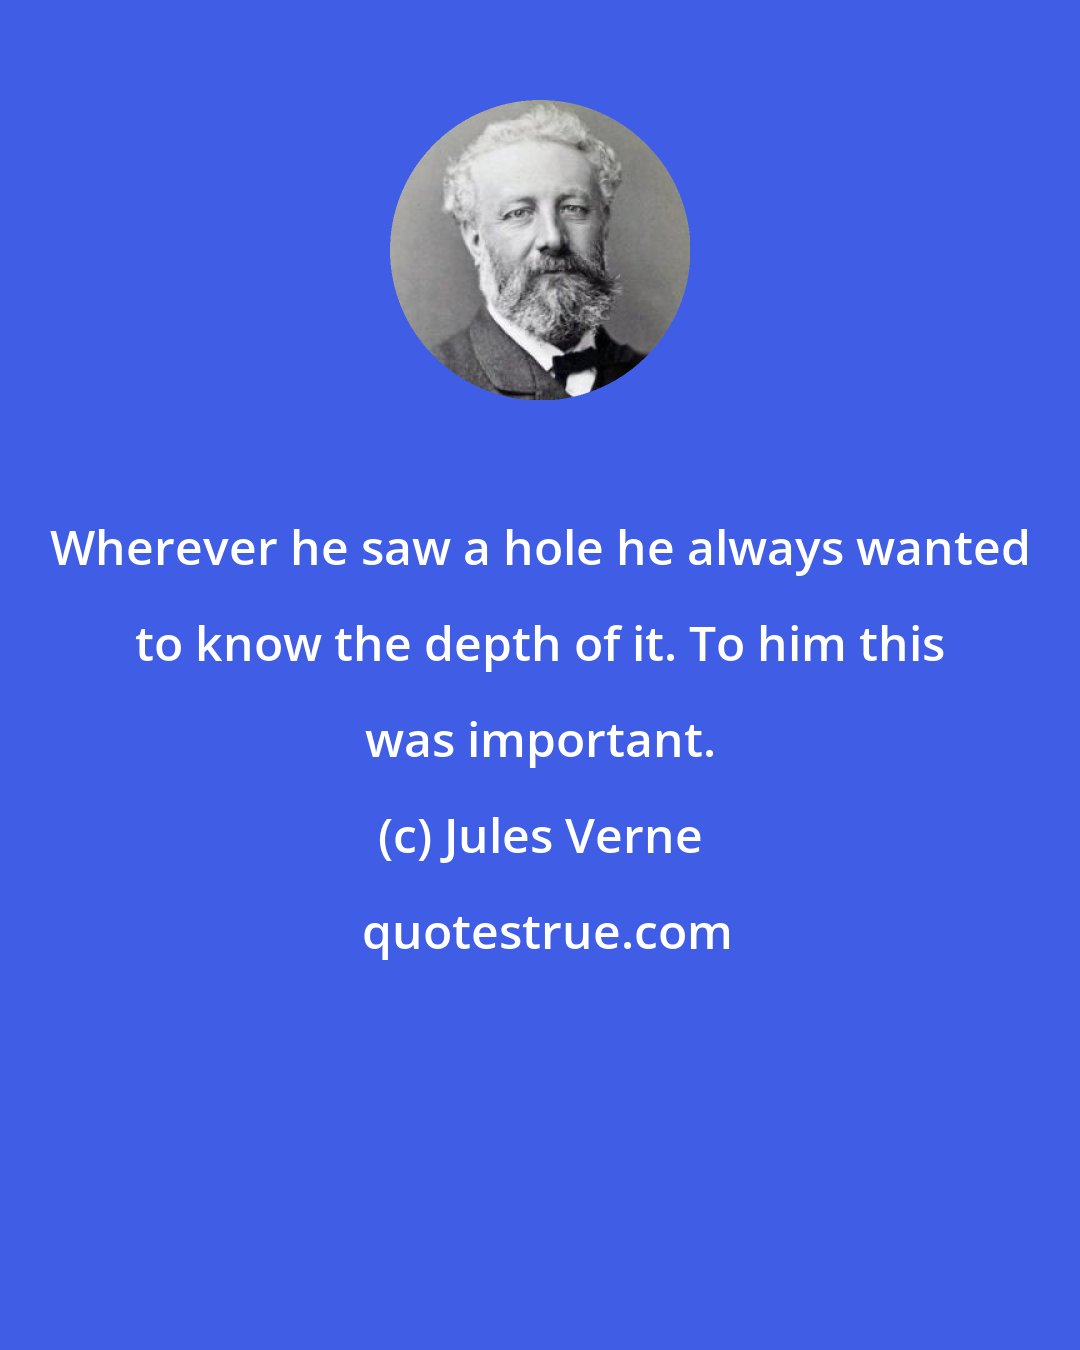 Jules Verne: Wherever he saw a hole he always wanted to know the depth of it. To him this was important.